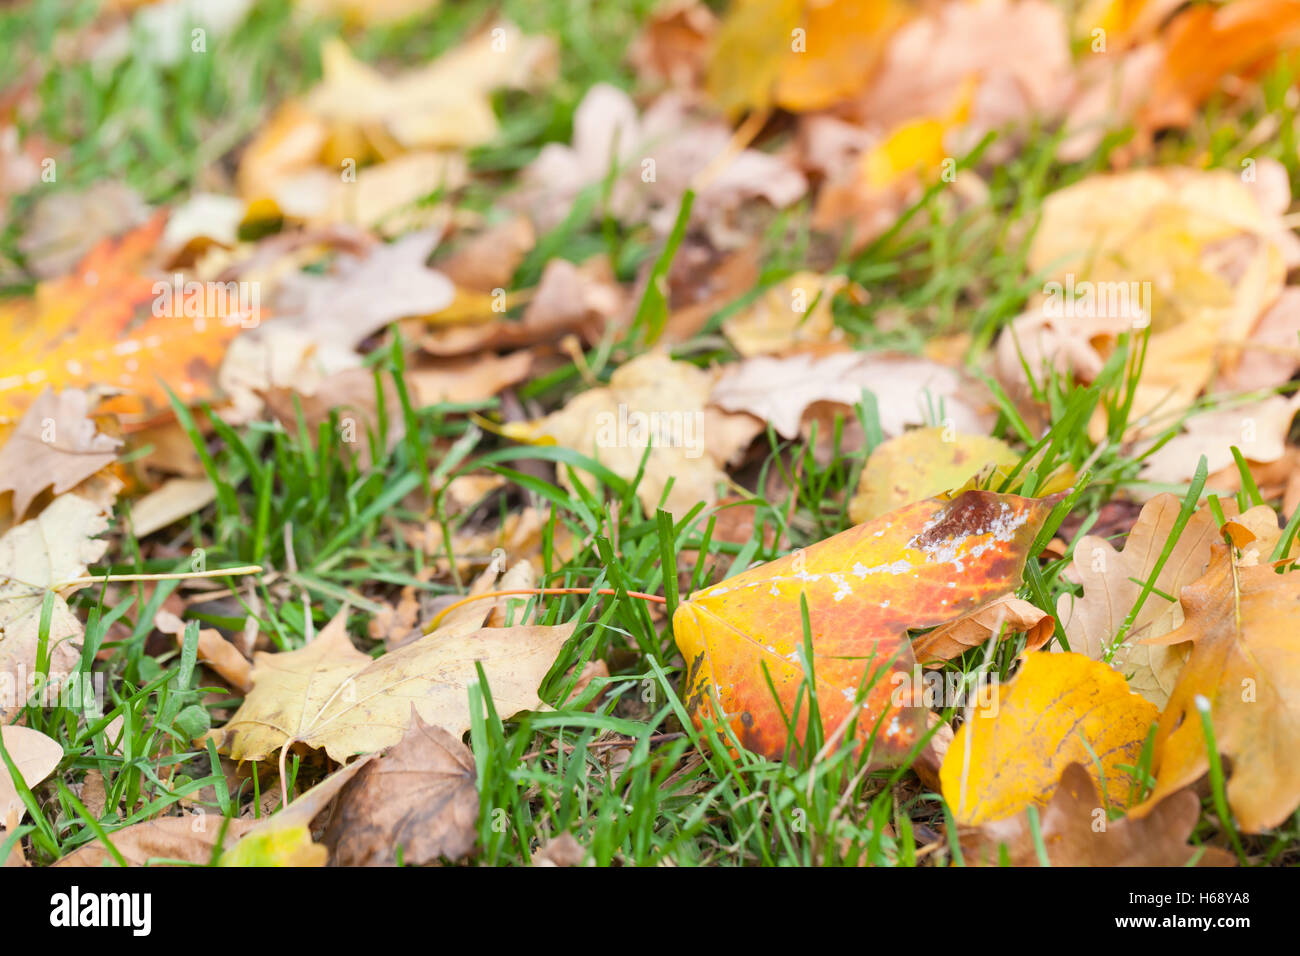 Fallen autumnal leaves lay on green grass in the sunlight, natural macro photo with selective focus and shallow DOF Stock Photo